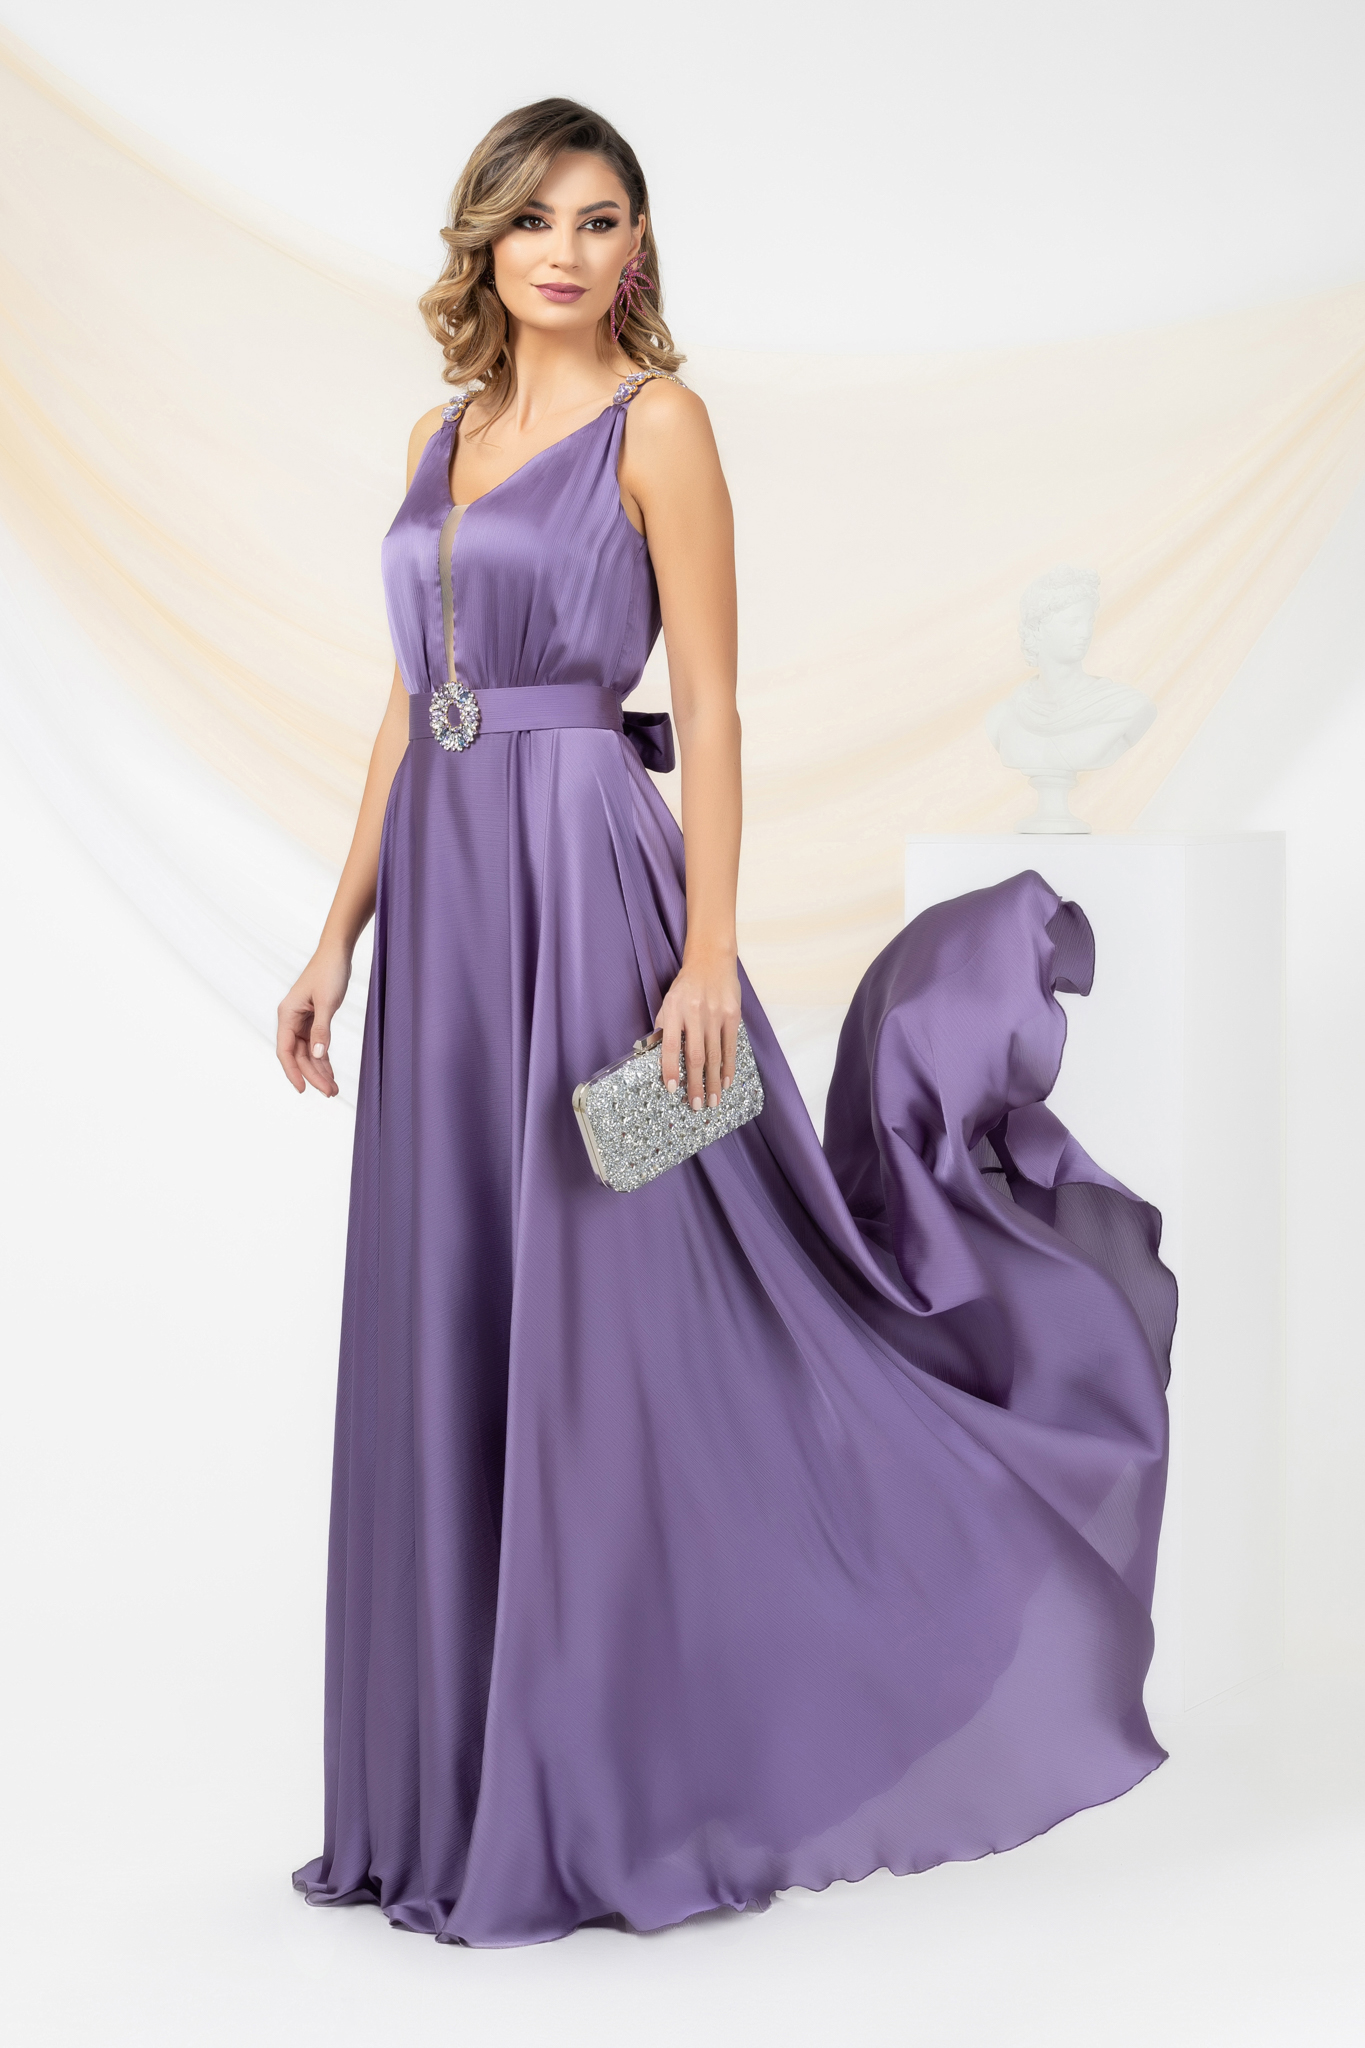 Purple dress from veil fabric from satin fabric texture long cloche with v-neckline